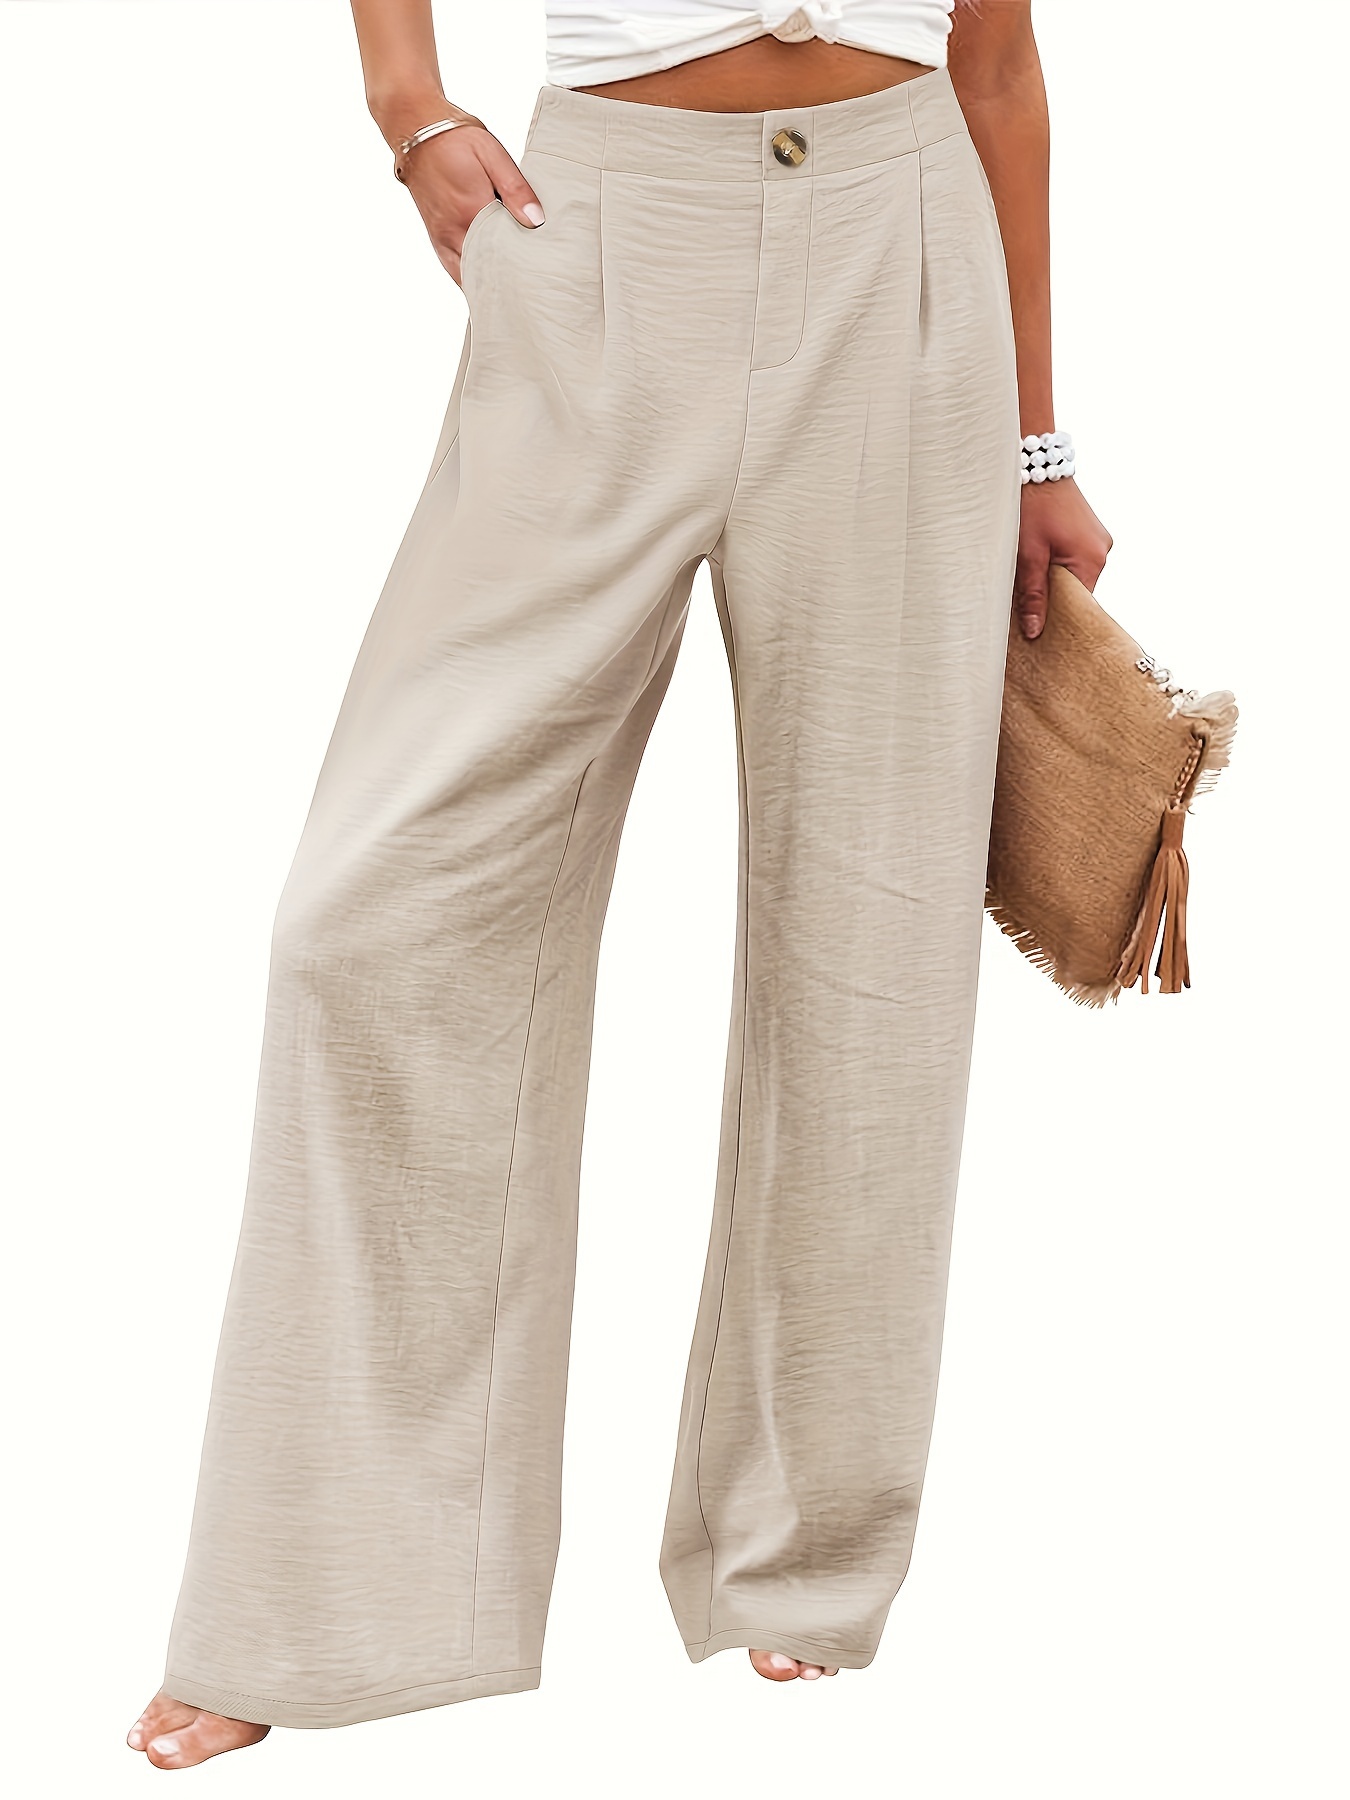 Cotton Linen Wide Leg Pants for Women Elastic High Waisted Palazzo Pants  Solid Color Casual Loose Pants with Pockets 